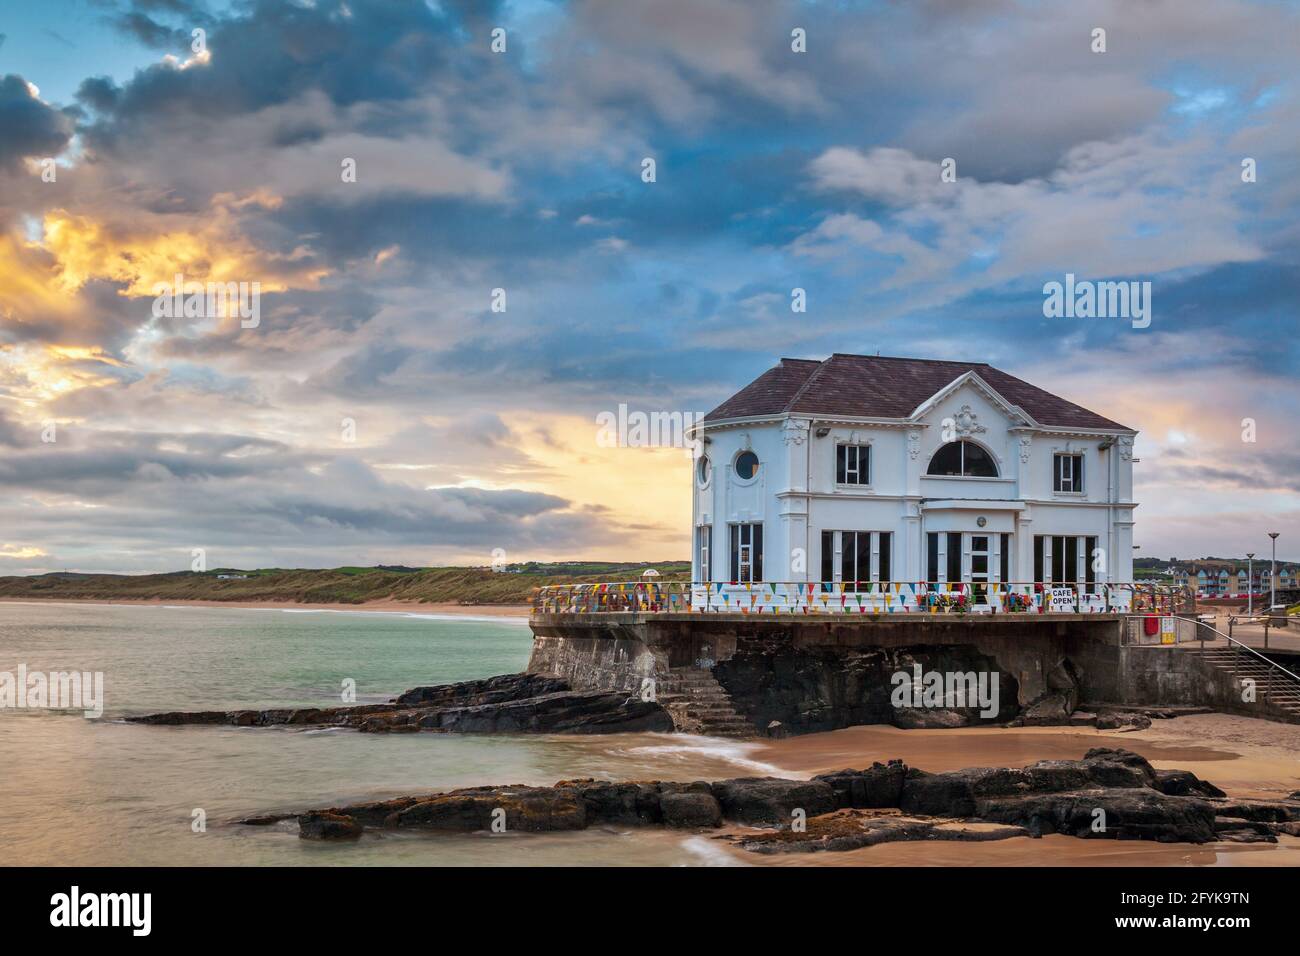 Sunset at the Arcadia, a historic cafe and former ballroom on the coast at Portrush, a small seaside resort town in County Antrim, Northern Ireland. Stock Photo